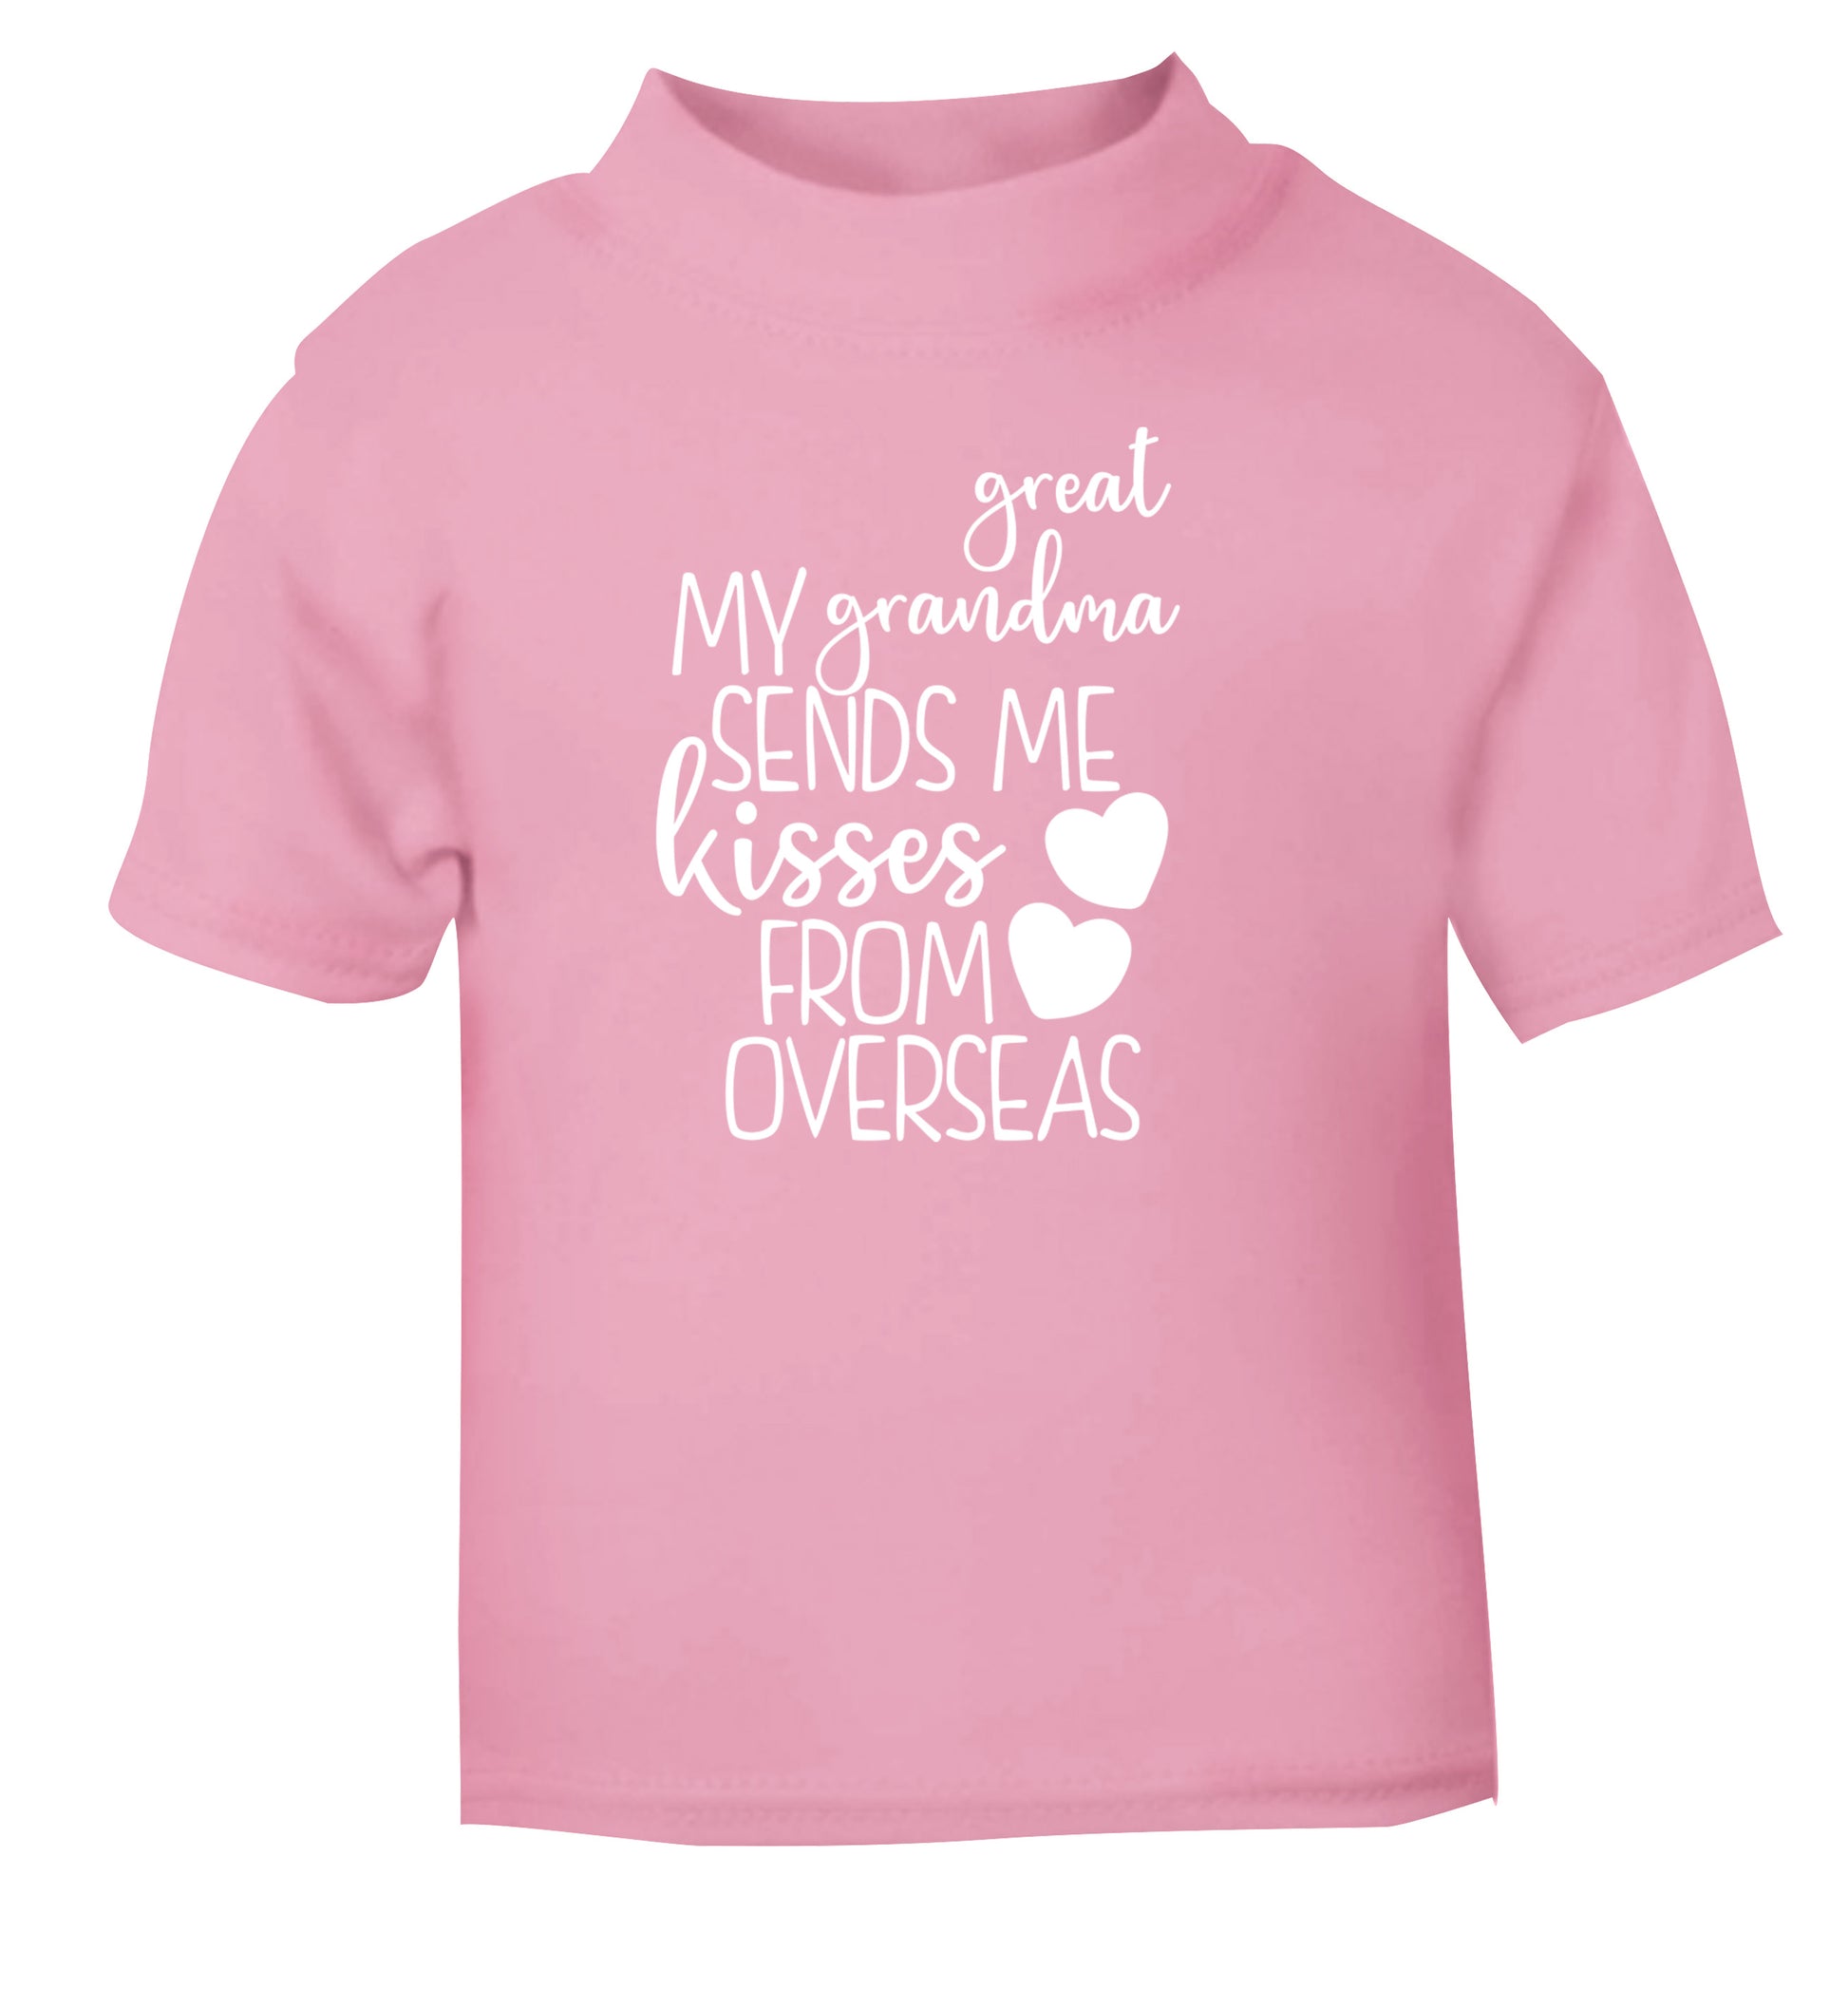 My great grandma sends me kisses from overseas light pink Baby Toddler Tshirt 2 Years